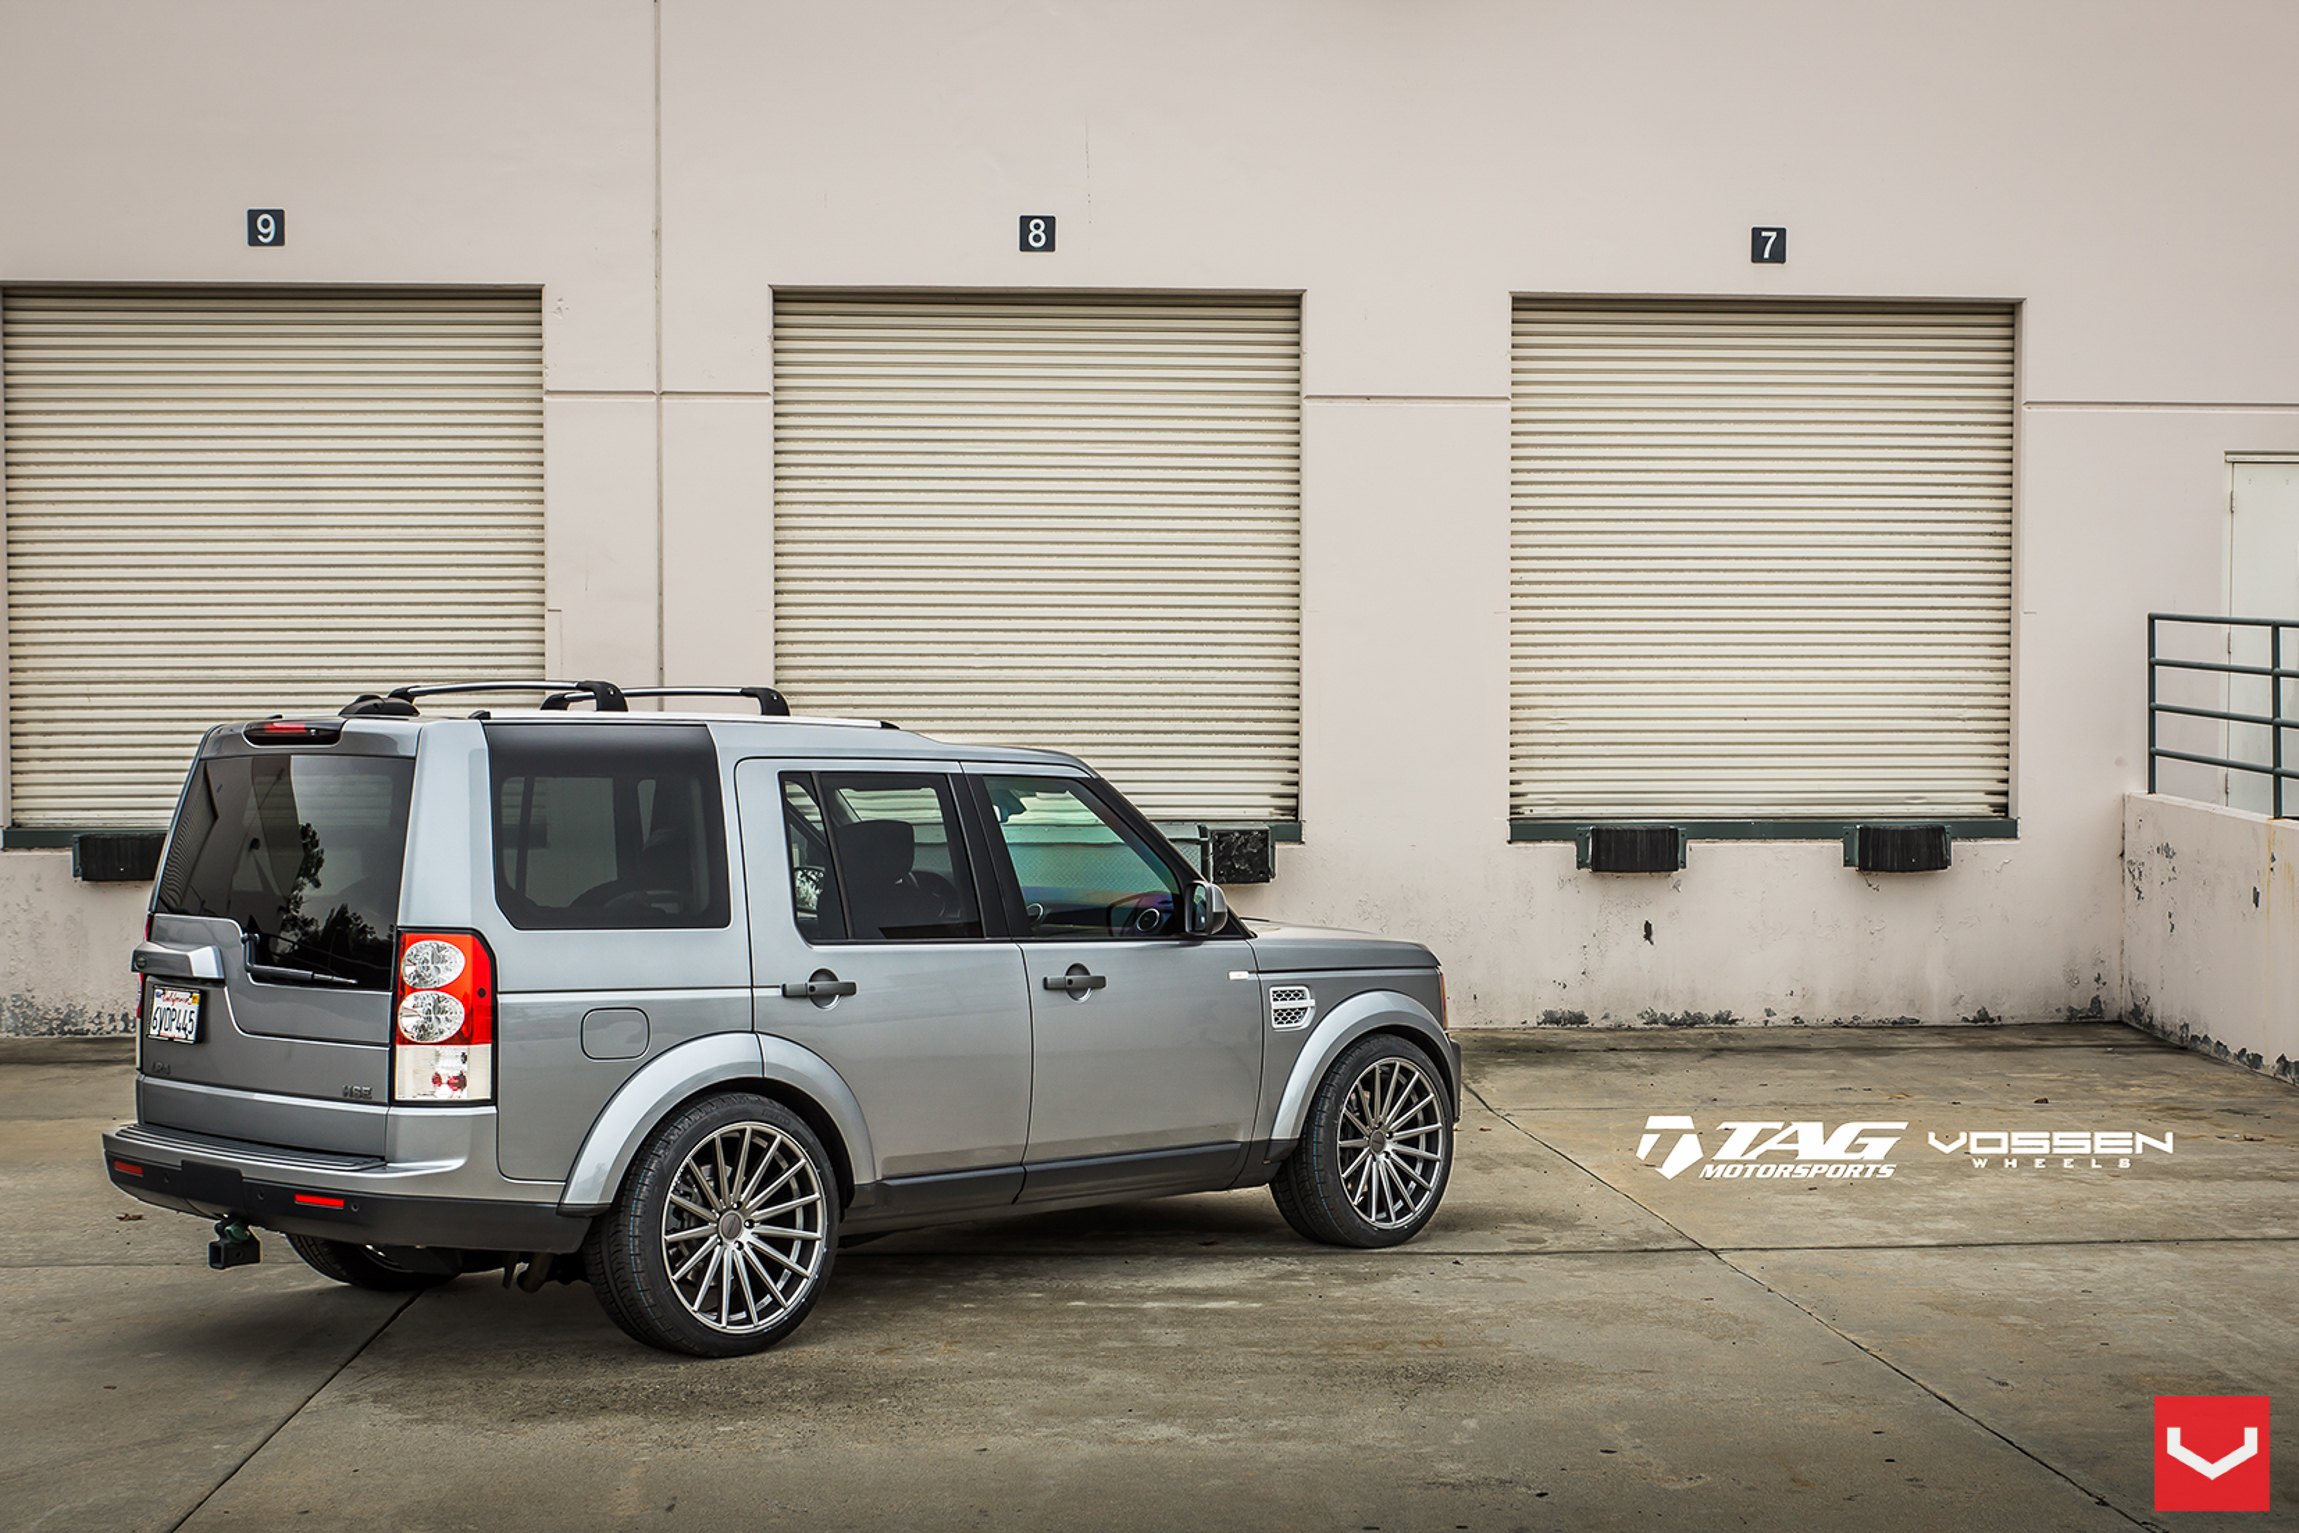 Колеса дискавери 3. Land Rover Discovery 4 Tuning r22. Land Rover Discovery r22. Ленд Ровер Дискавери 4 r22. Land Rover Discovery 4 r20.